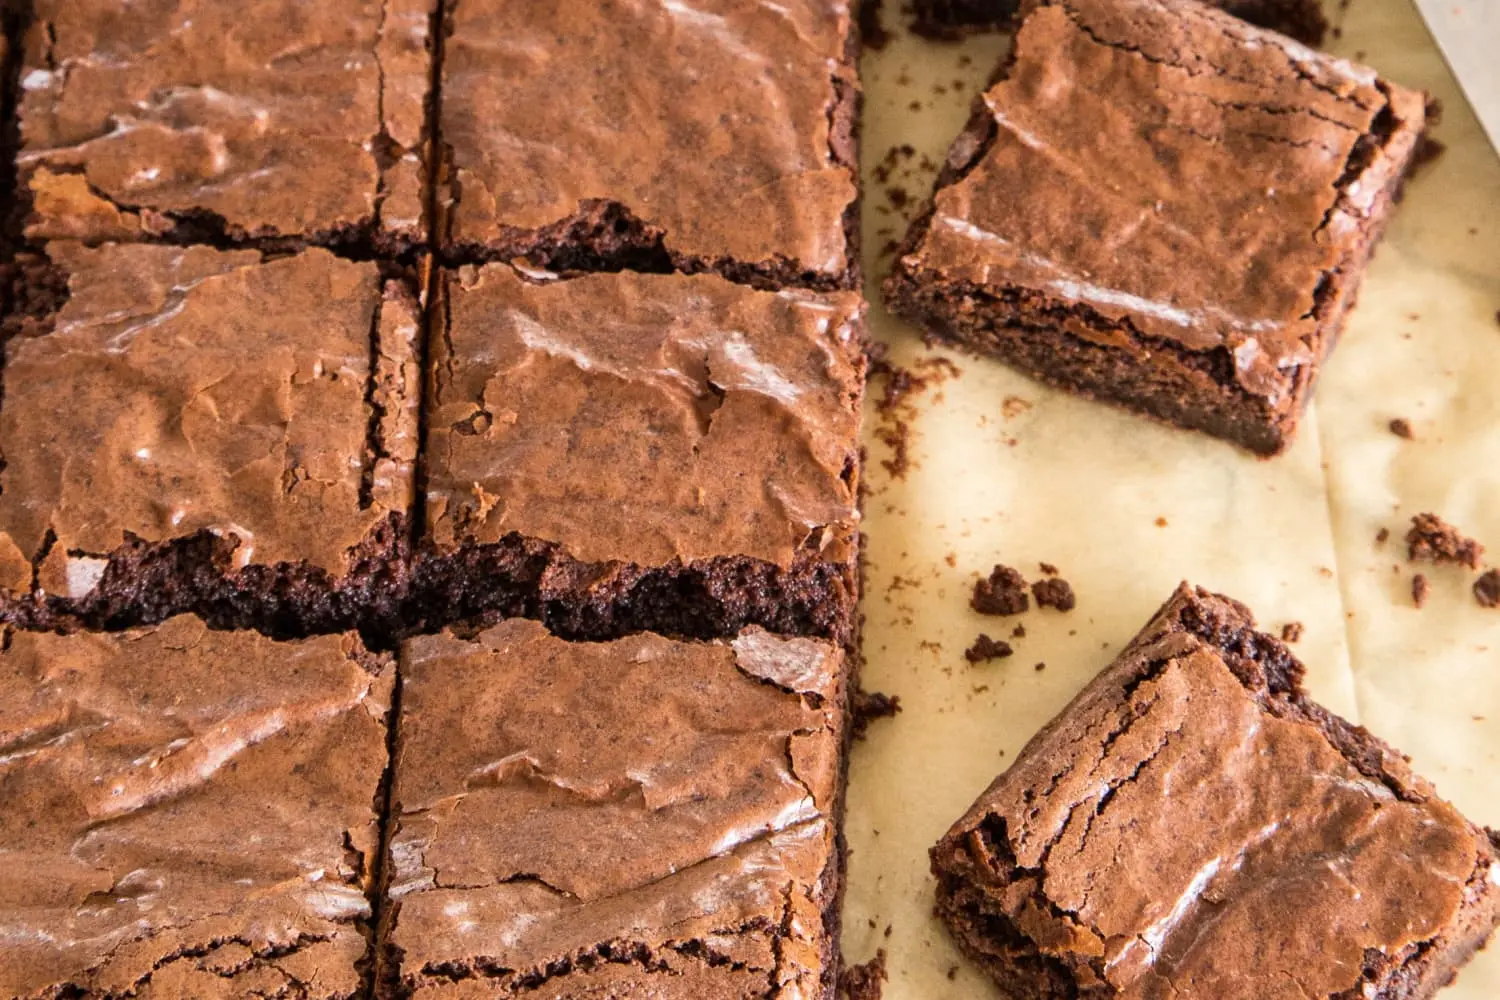 smoked brownie - What's the difference between chocolate brownies and cocoa brownies